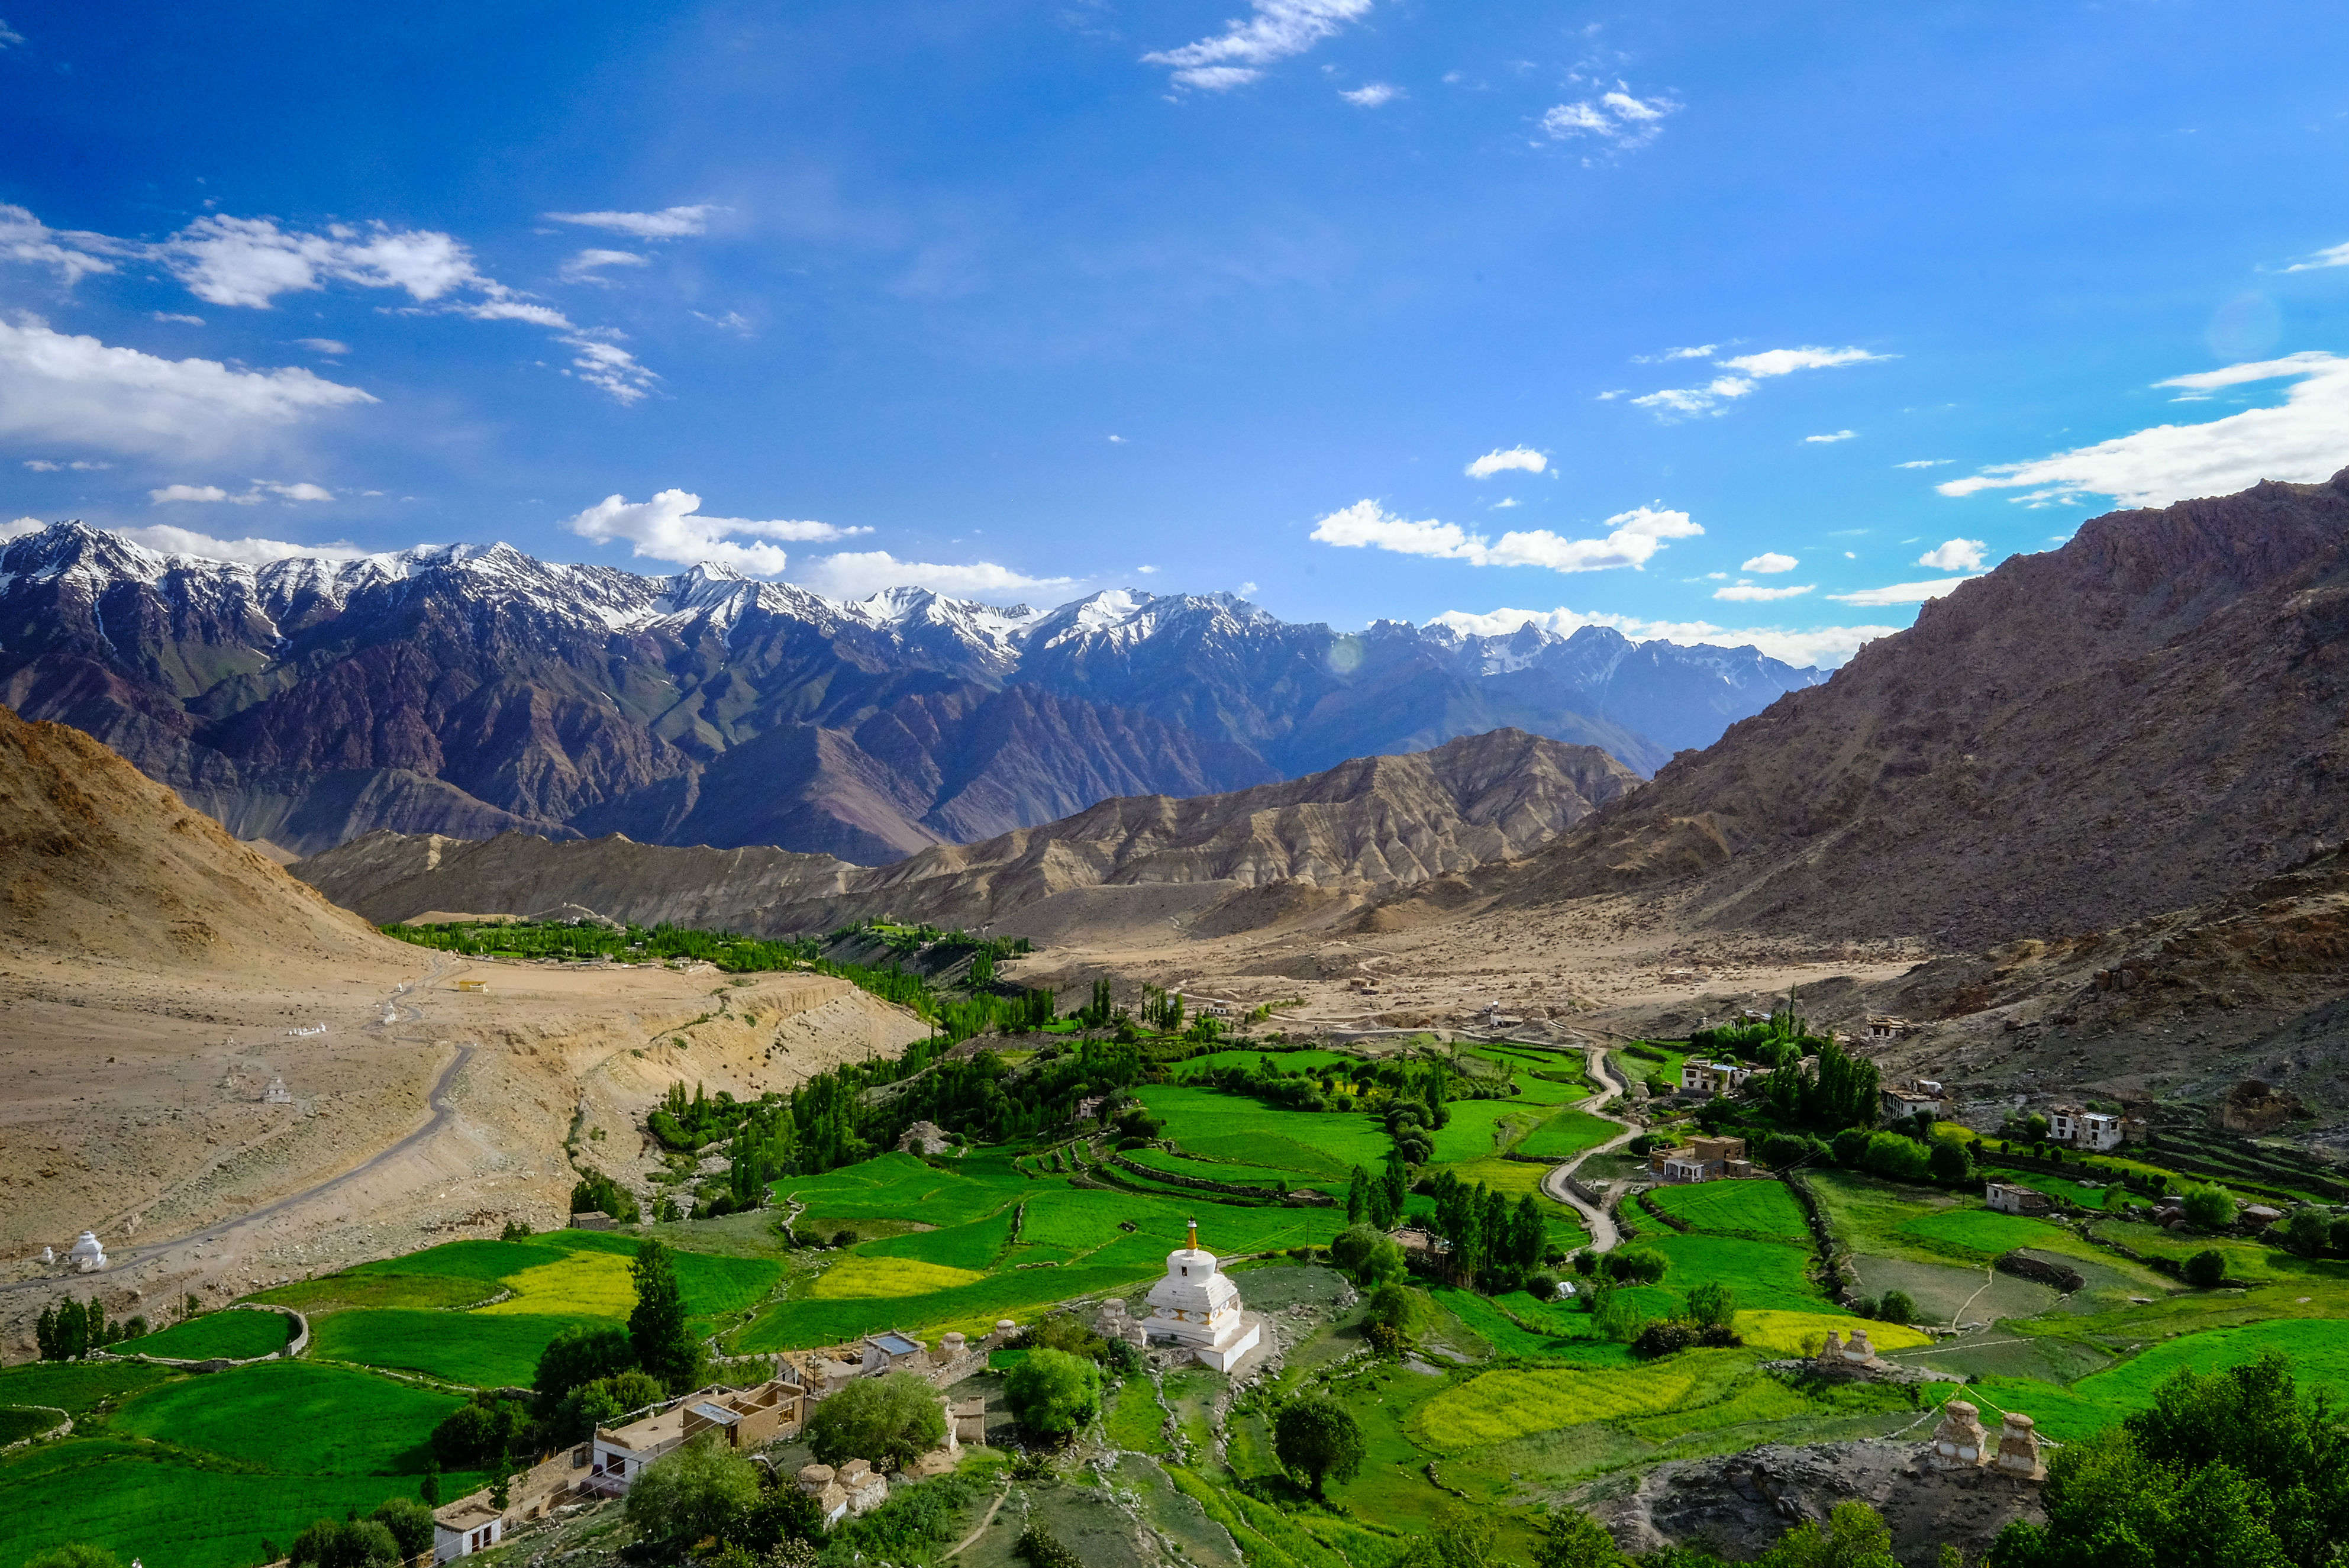 Essential tips for a Leh-Ladakh trip for first-time travellers